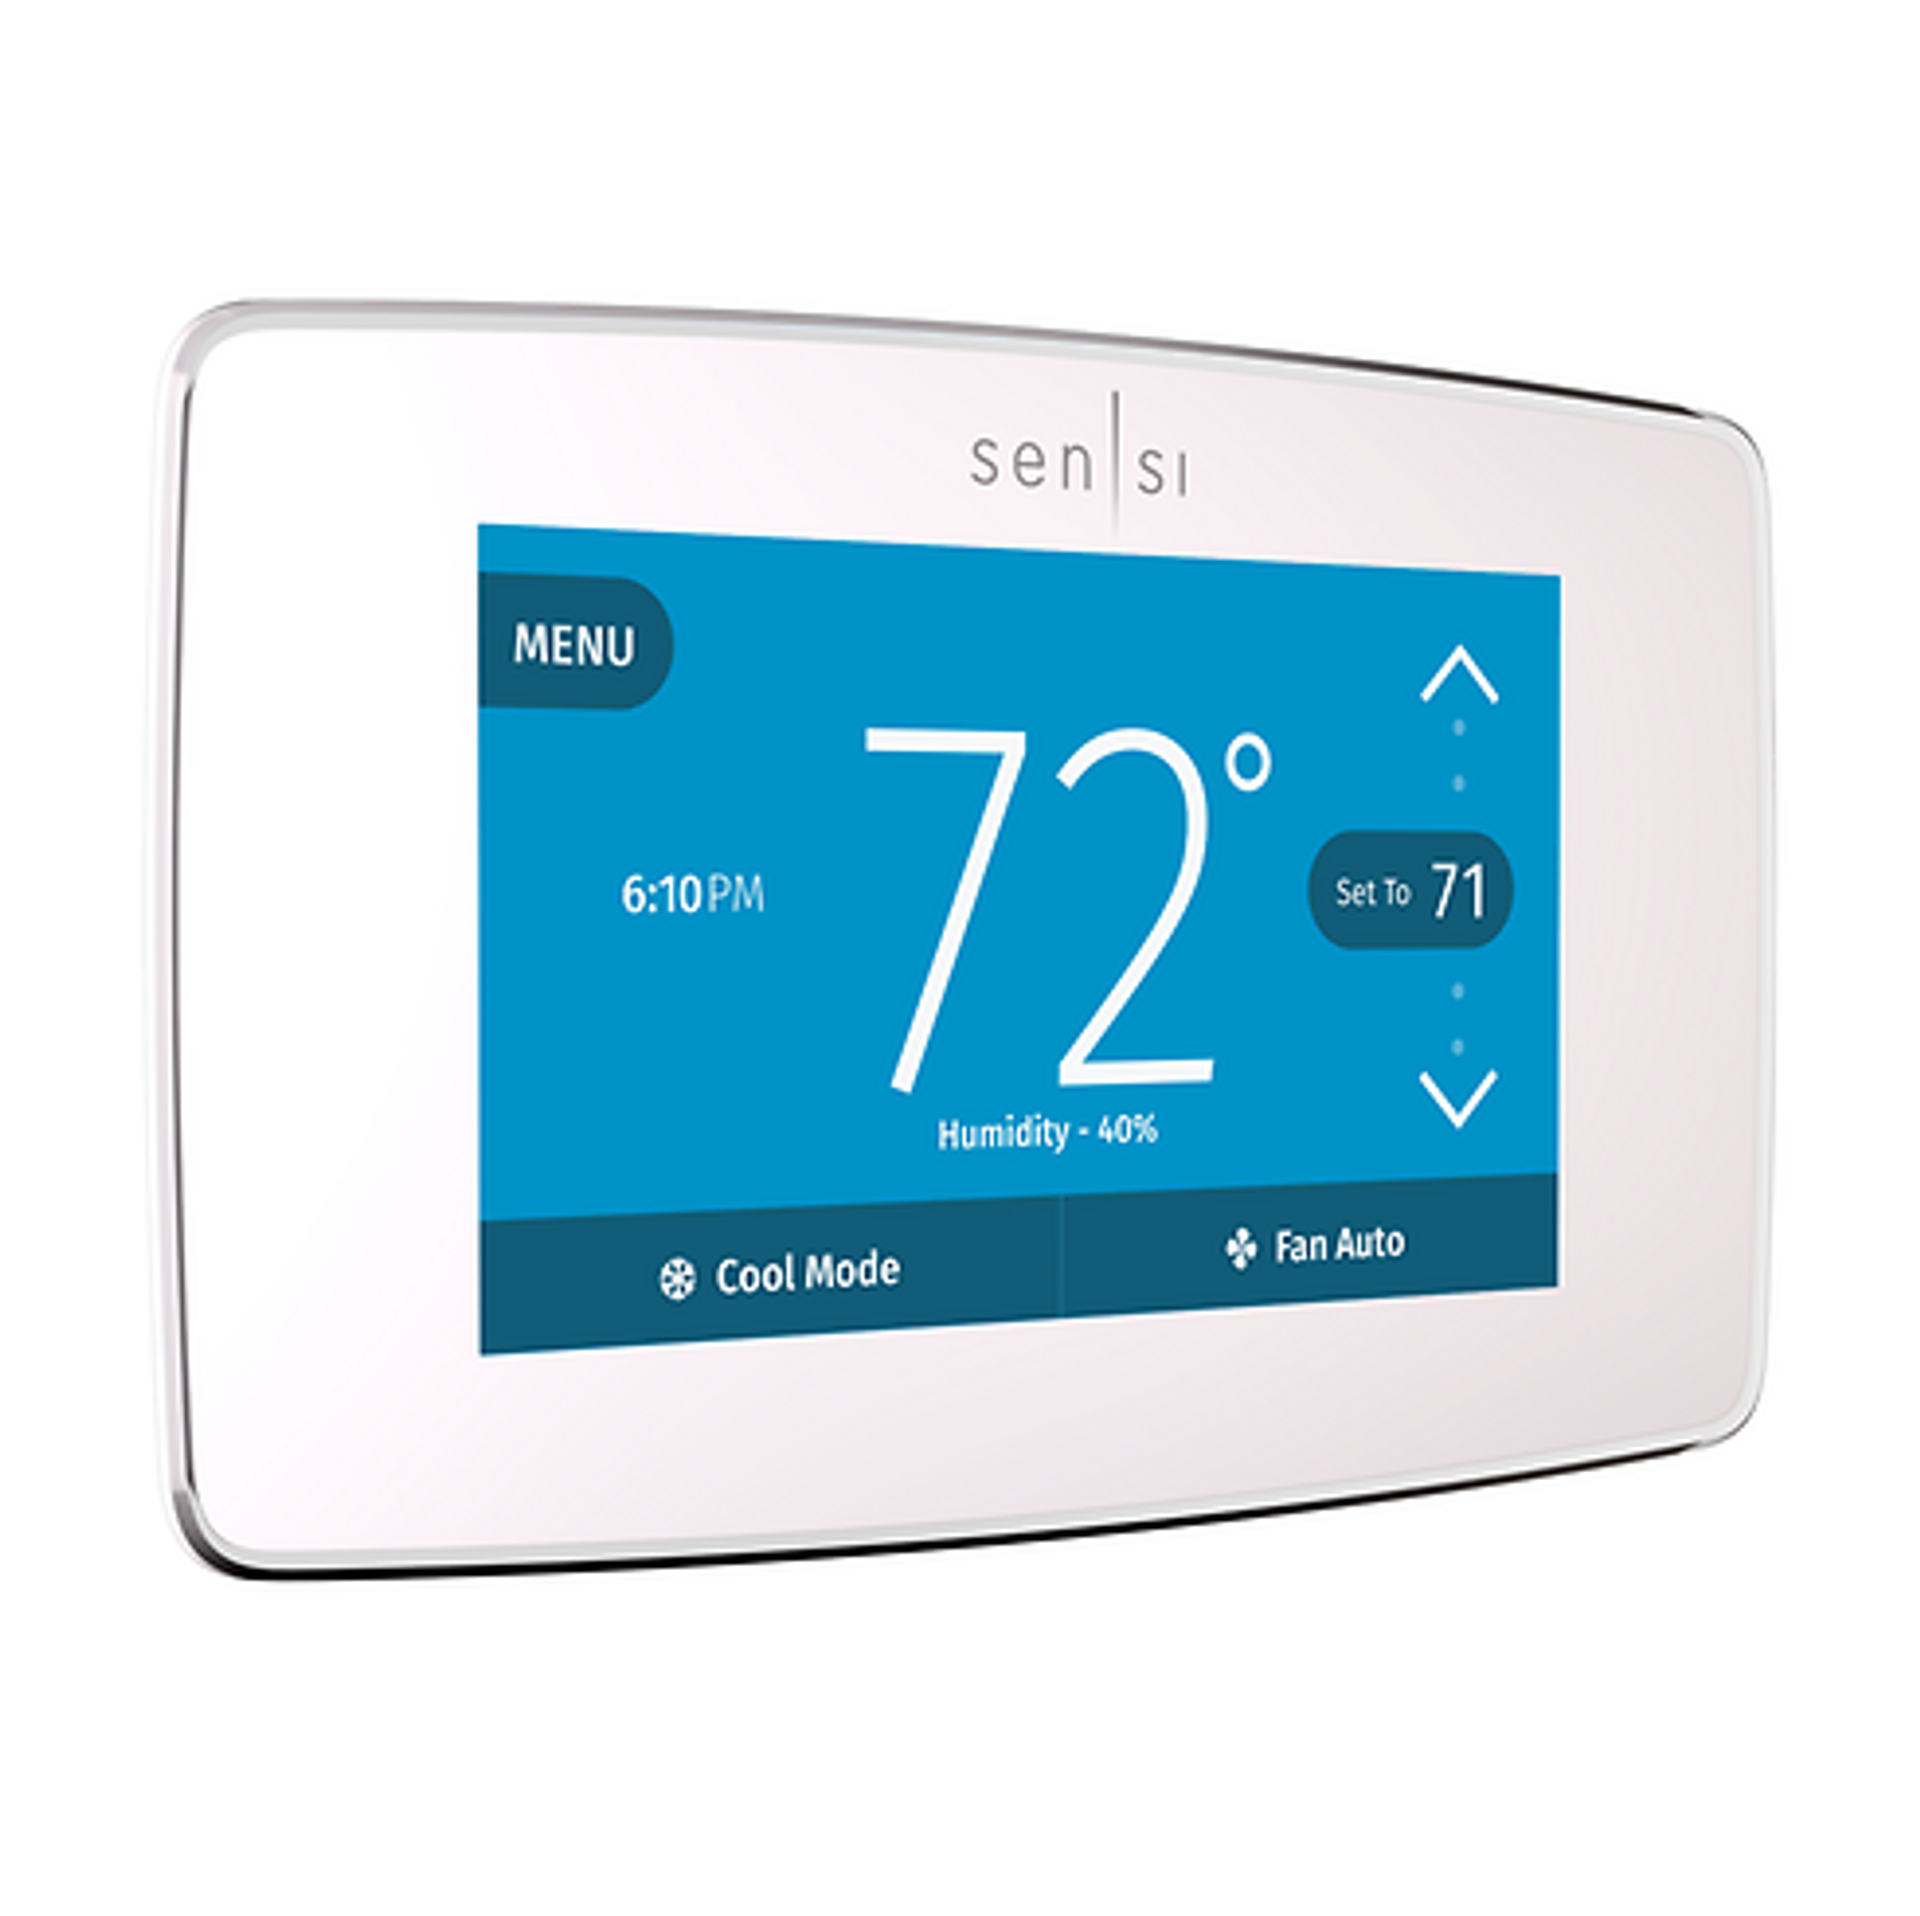 emerson-sensi-touch-wi-fi-thermostat-am-conservation-group